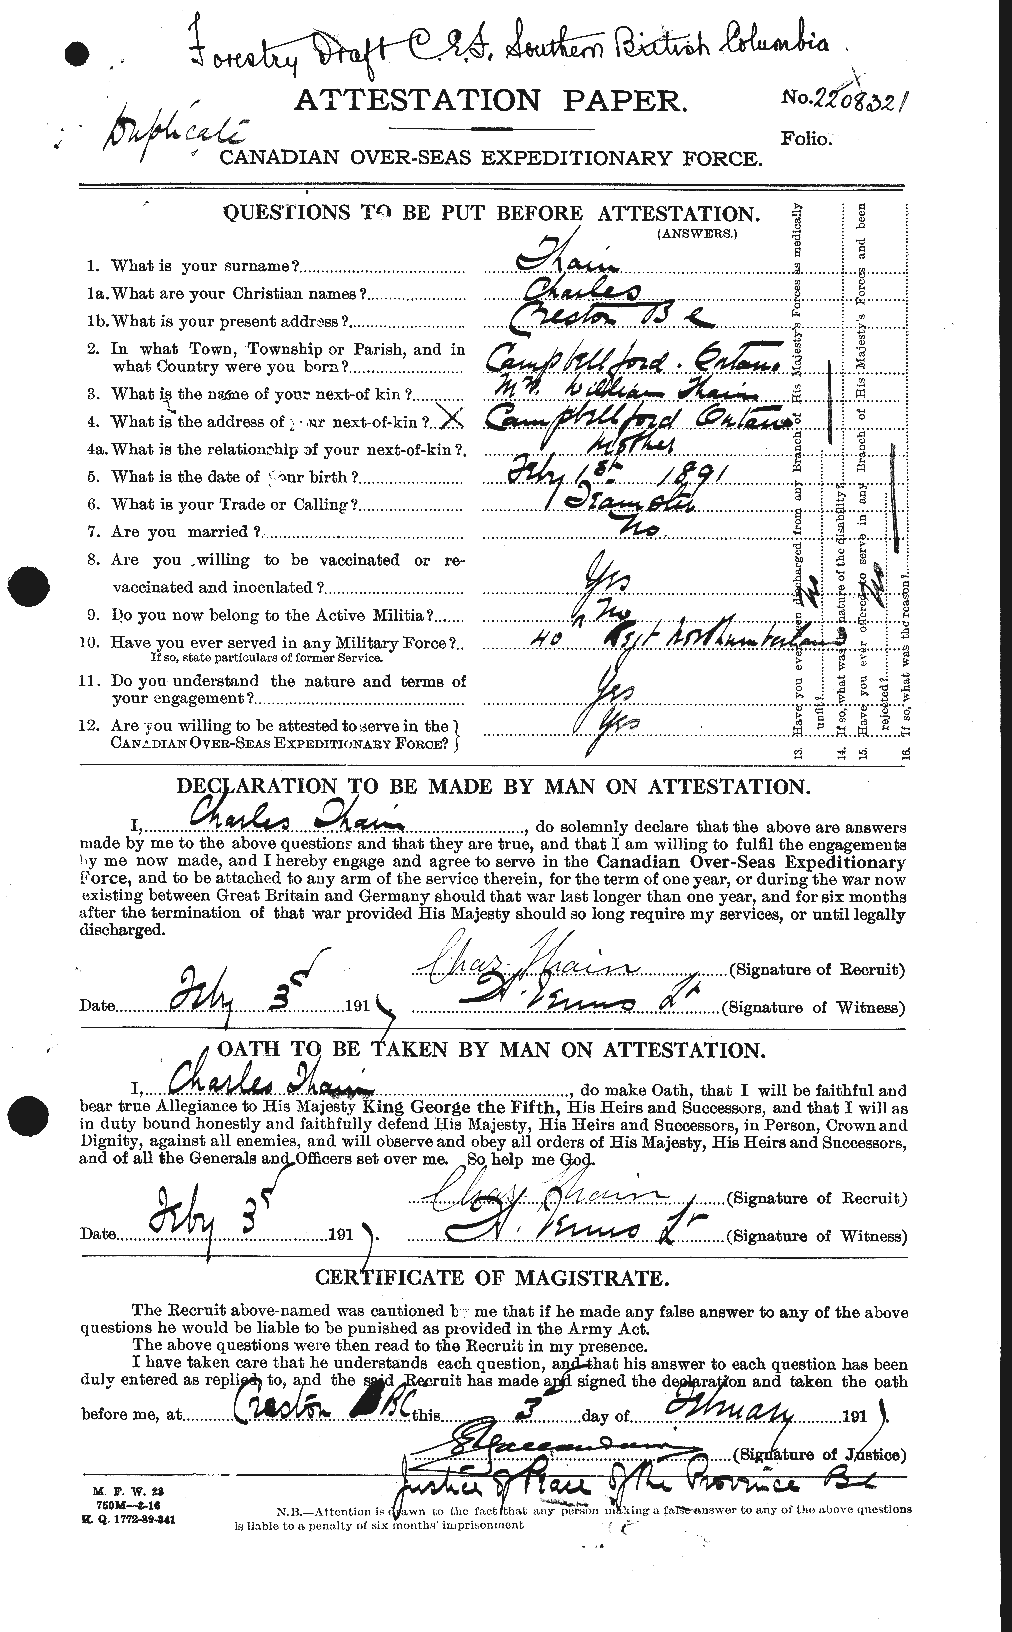 Personnel Records of the First World War - CEF 629450a